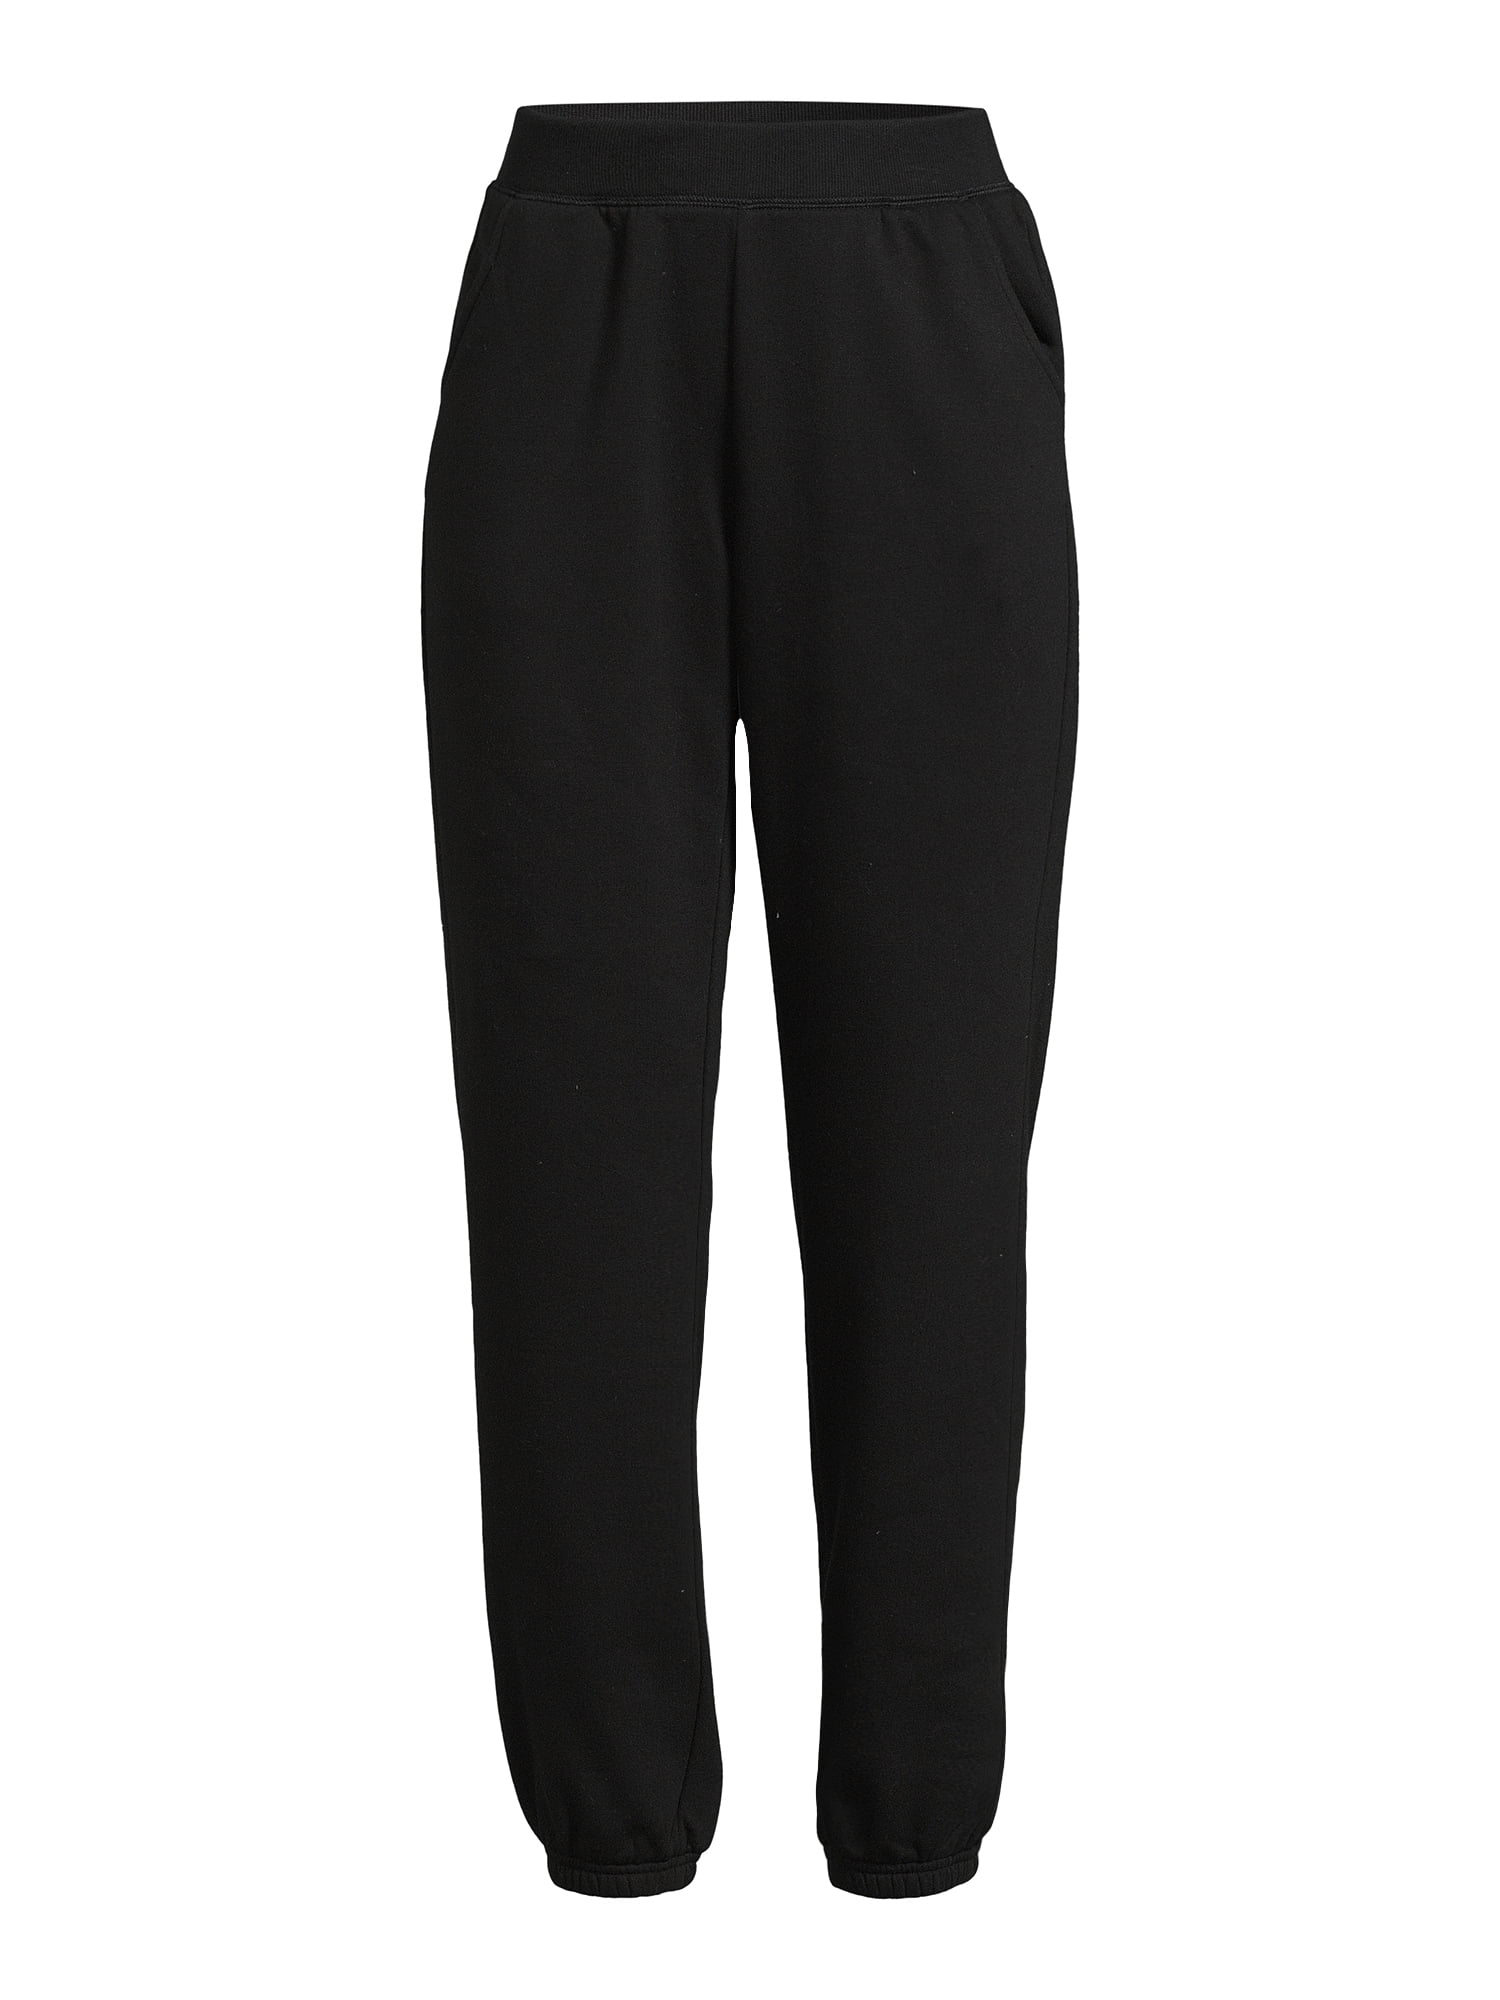 Black Women''S Track Pant Sport Tights Yoga Pants Joggers, Model  Name/Number: D-57 at Rs 599/mrp in Surat